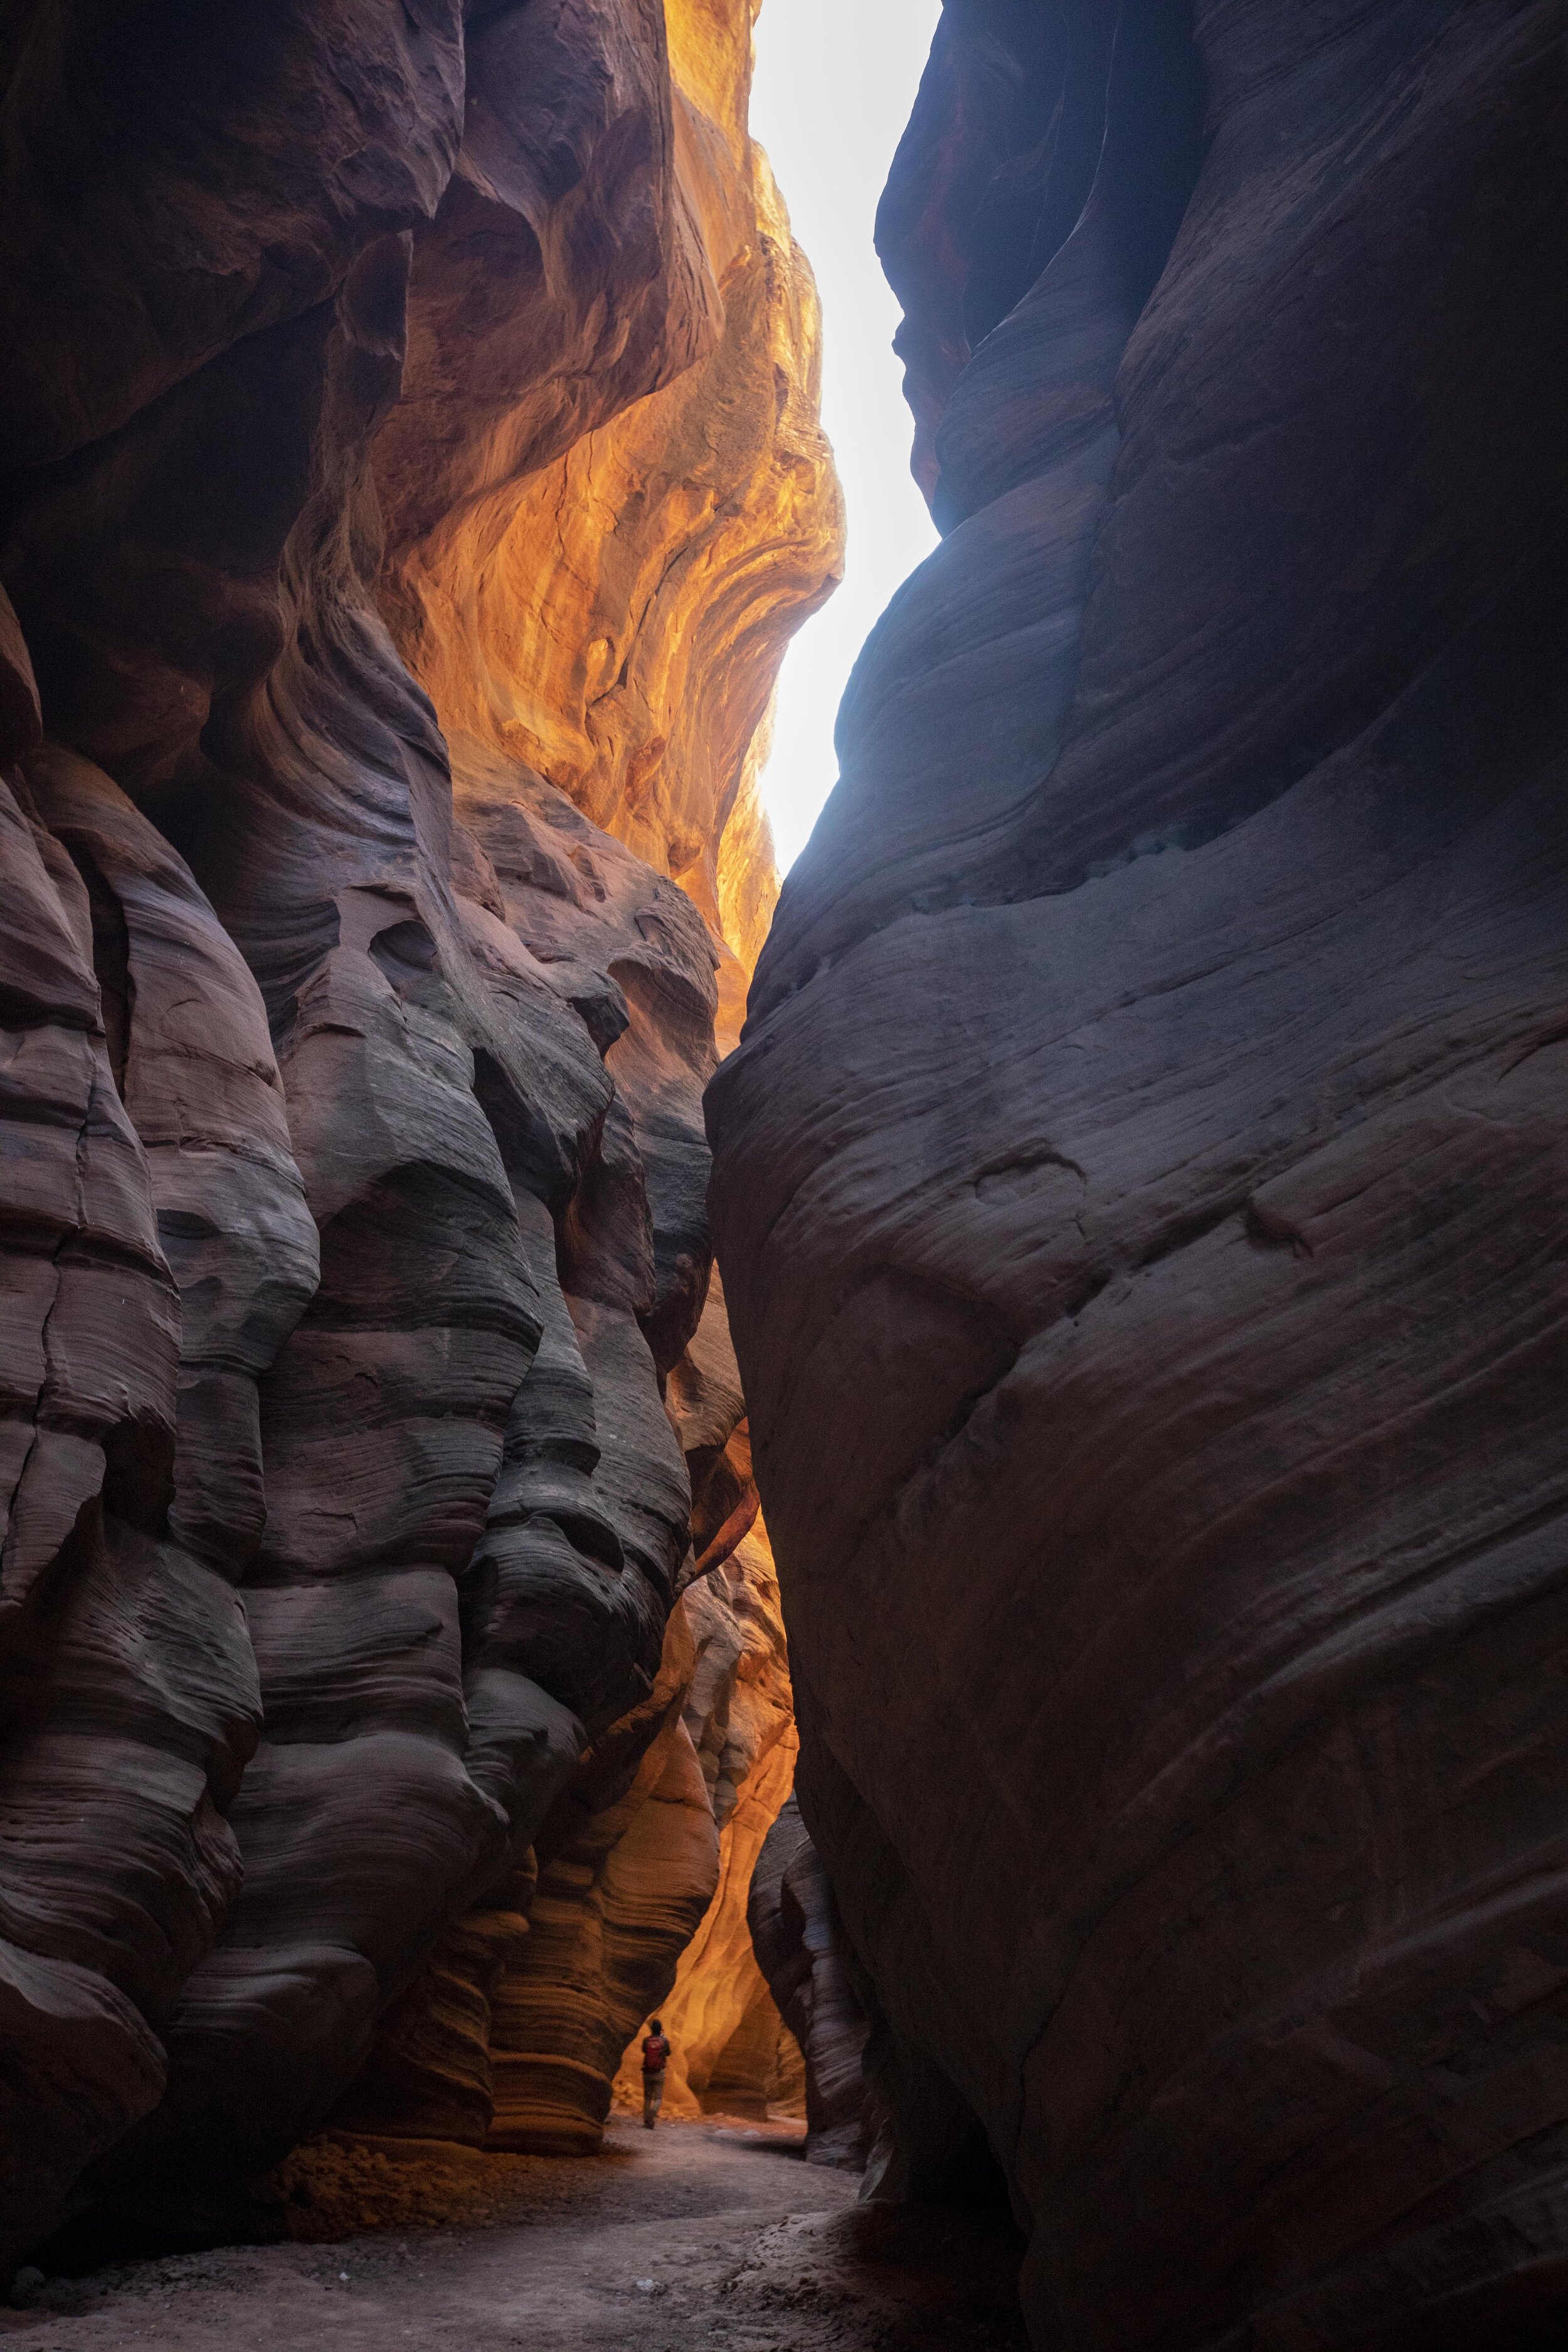  A hiker hikes in Buckskin Gulch in Utah, the longest and deepest slot canyon in the Southwestern US. It is popular with hikers and canyoneers and is possibly the longest slot canyon in the world.  